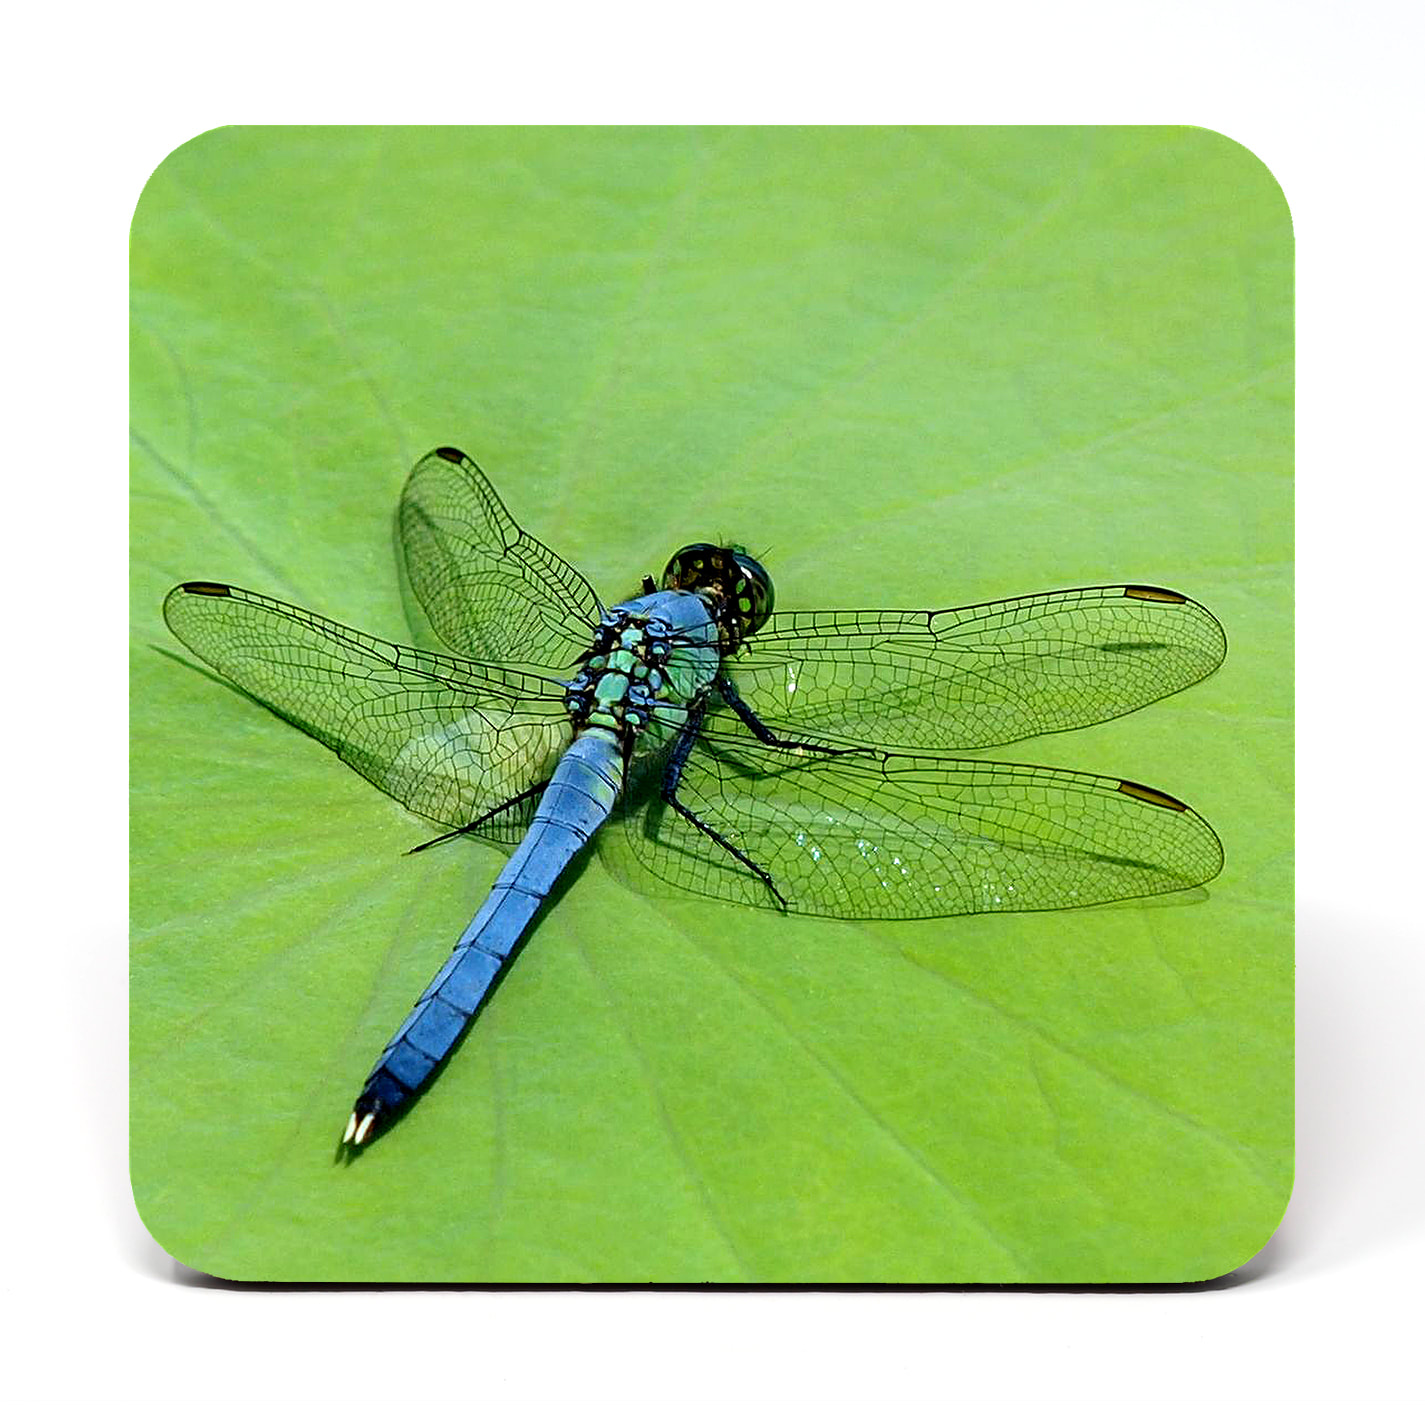 Dragonflies (set of 4 coasters) by Chris Fedderson